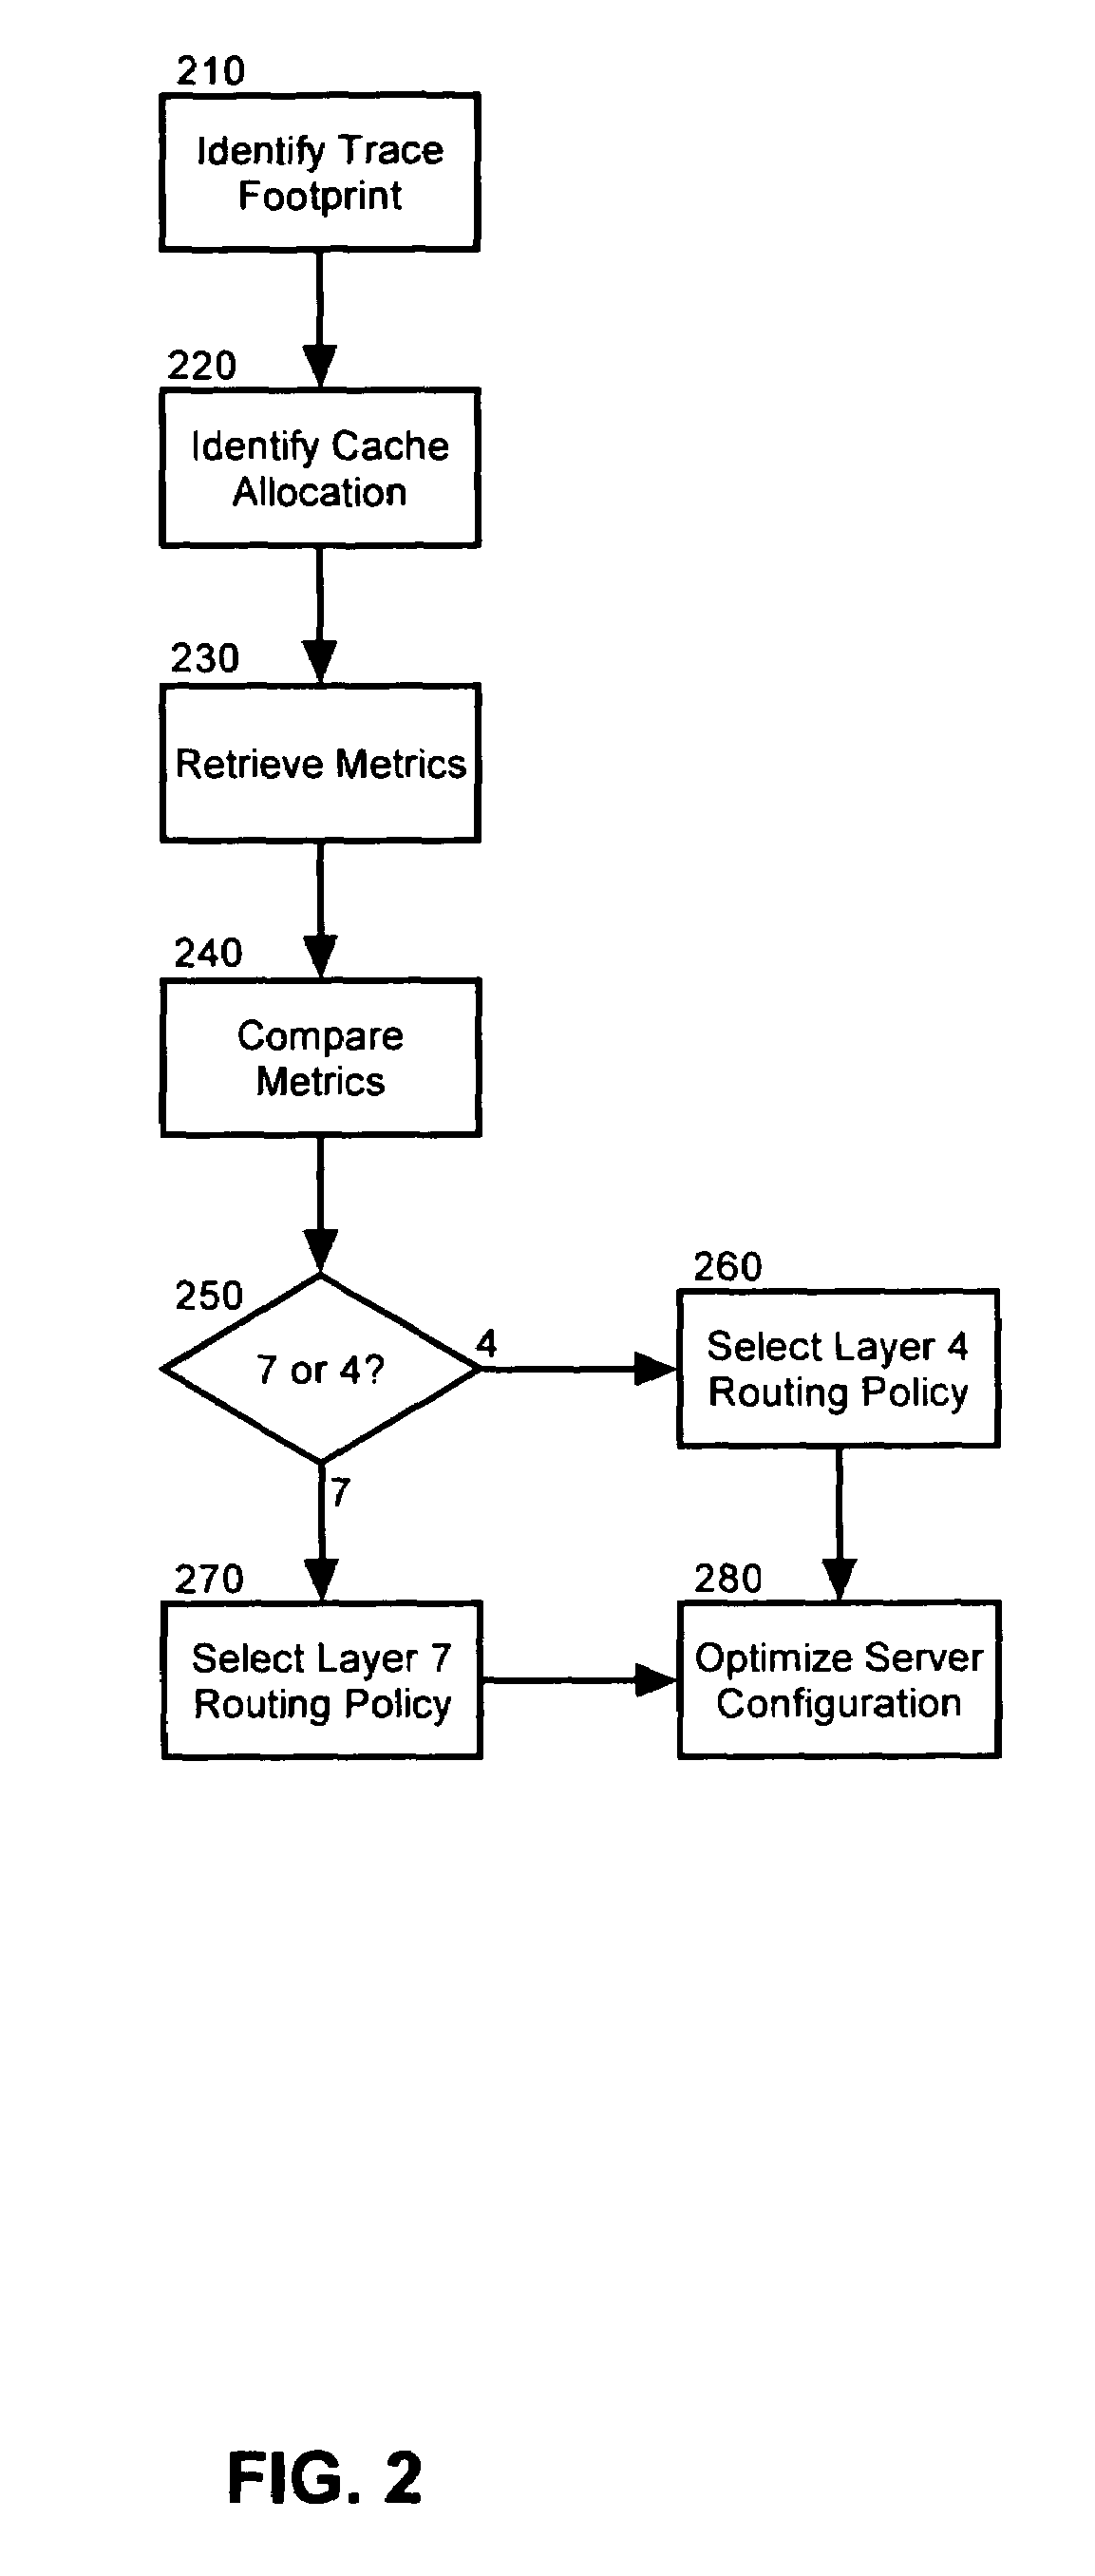 Autonomic selection of a request routing policy based upon cache effectiveness